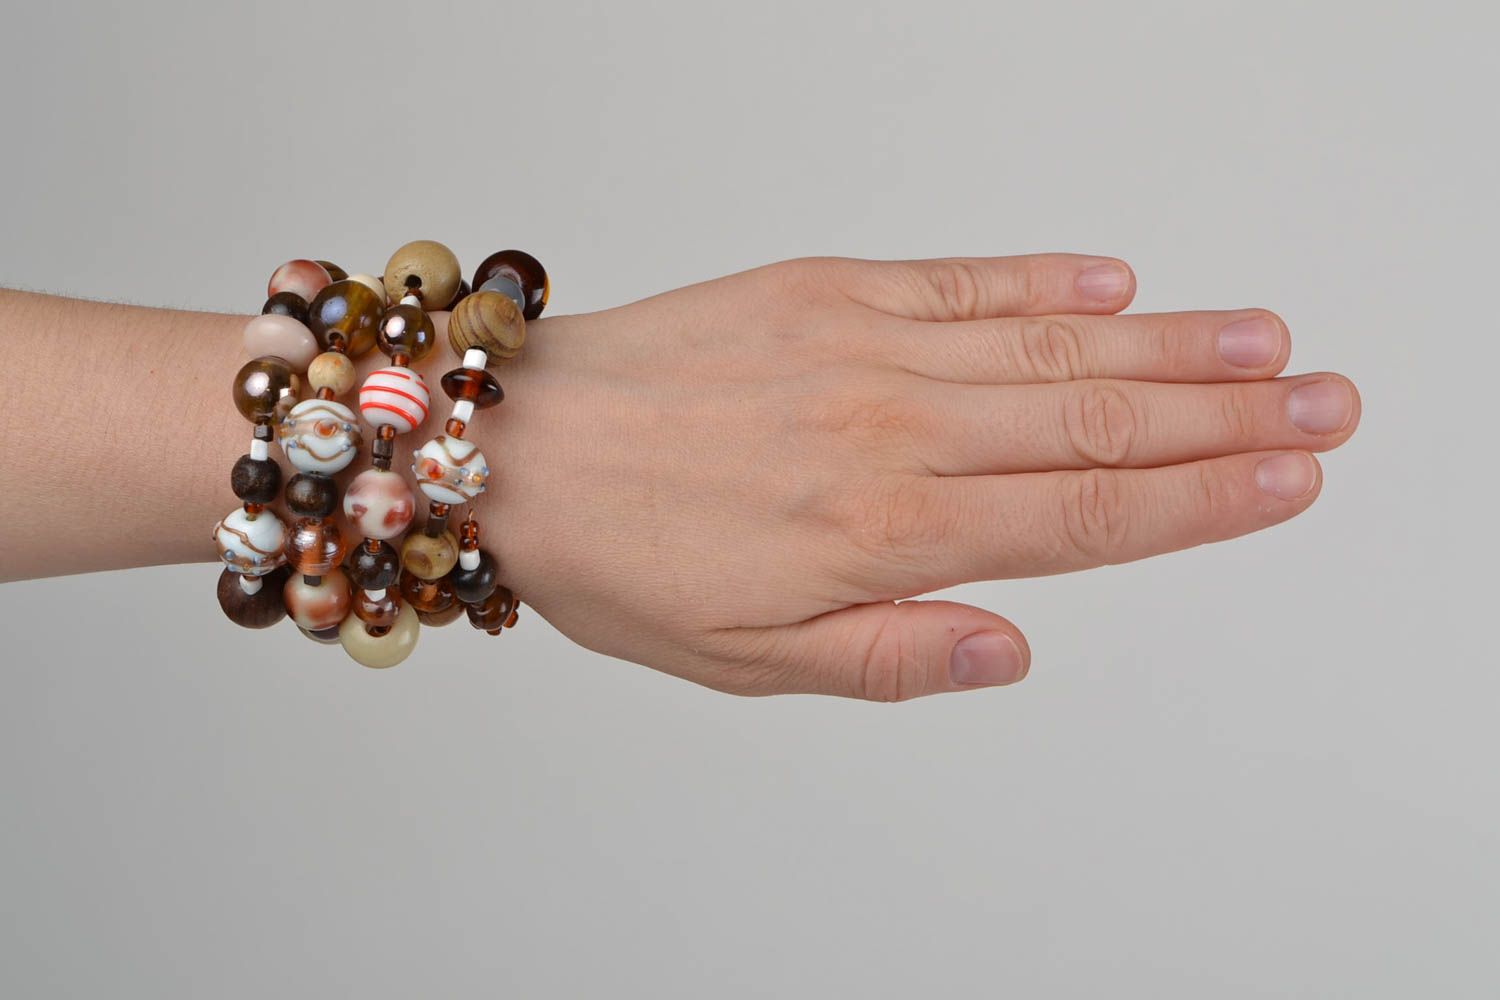 Handmade designer women's wrist bracelet with colorful wooden and glass beads photo 2